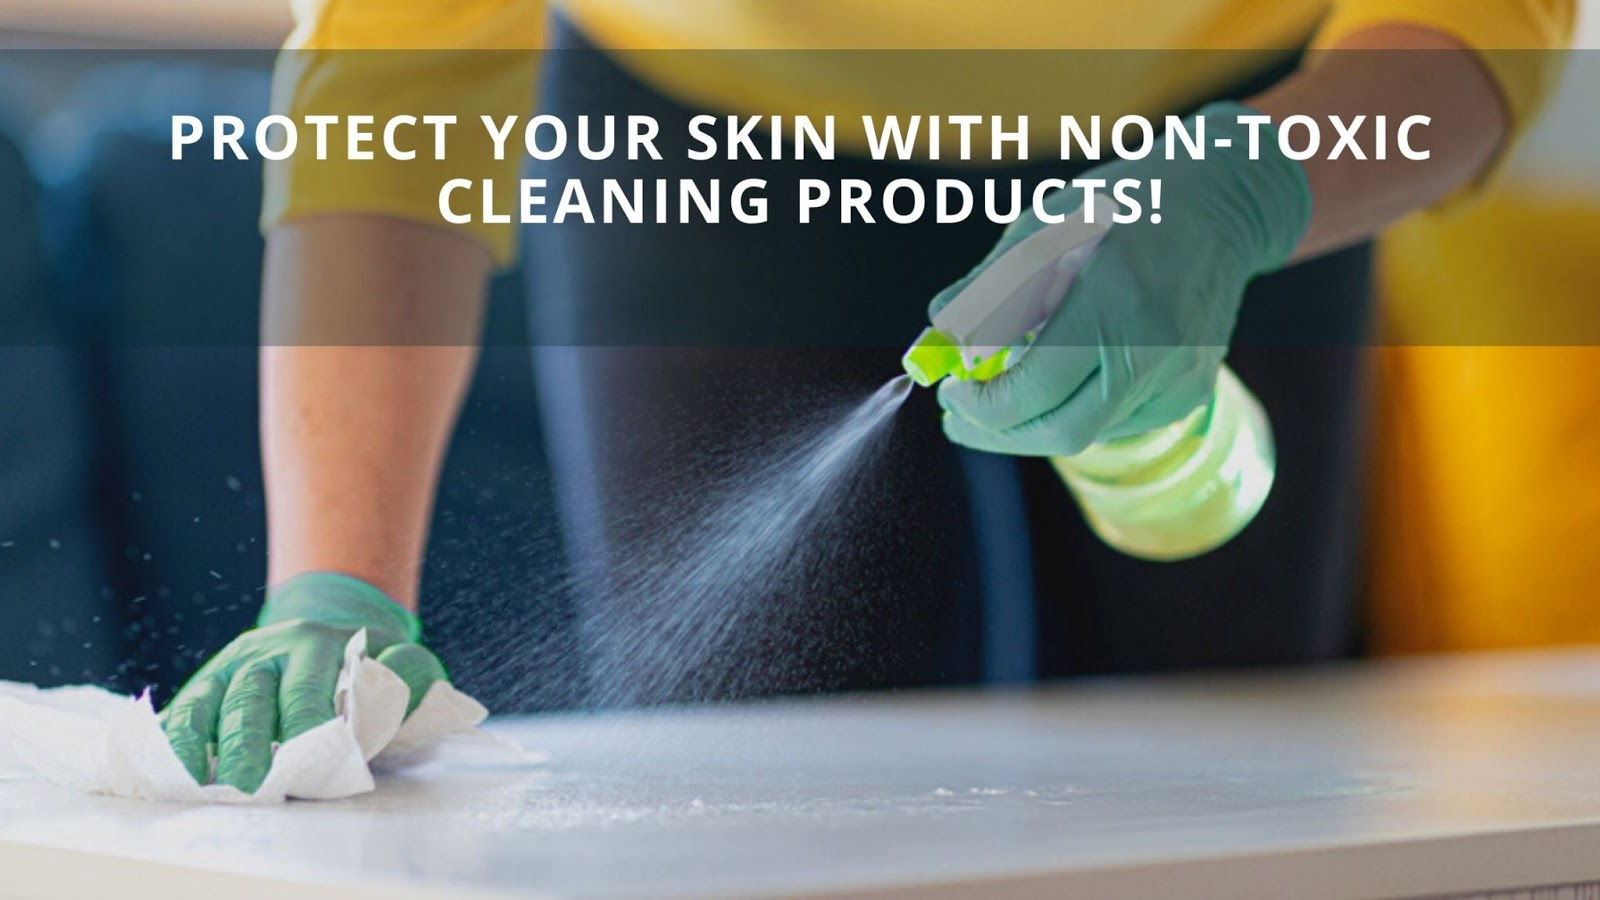 Protect Your Skin With Non-toxic Cleaning Products